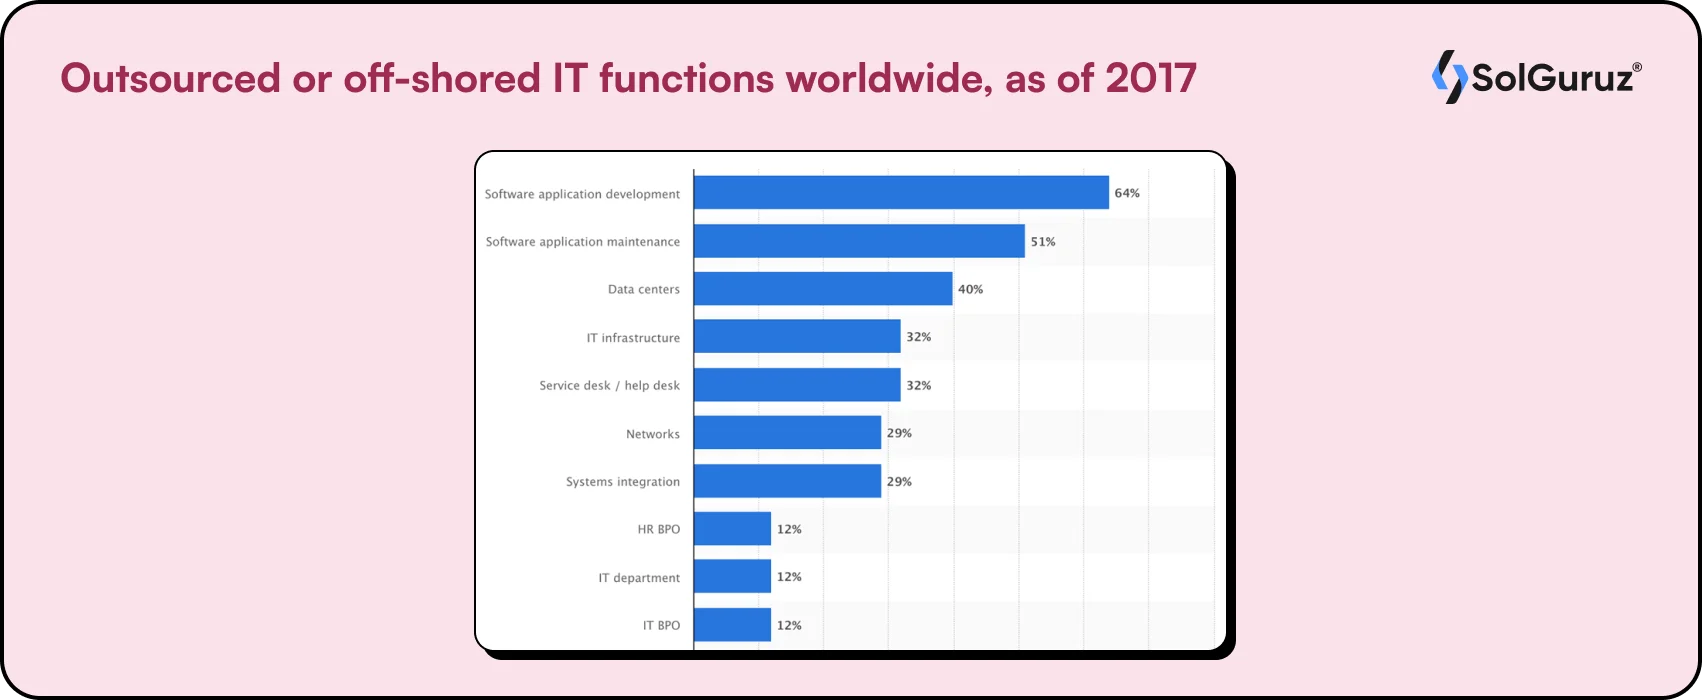 Outsourced or off-shored IT functions worldwide, as of 2017